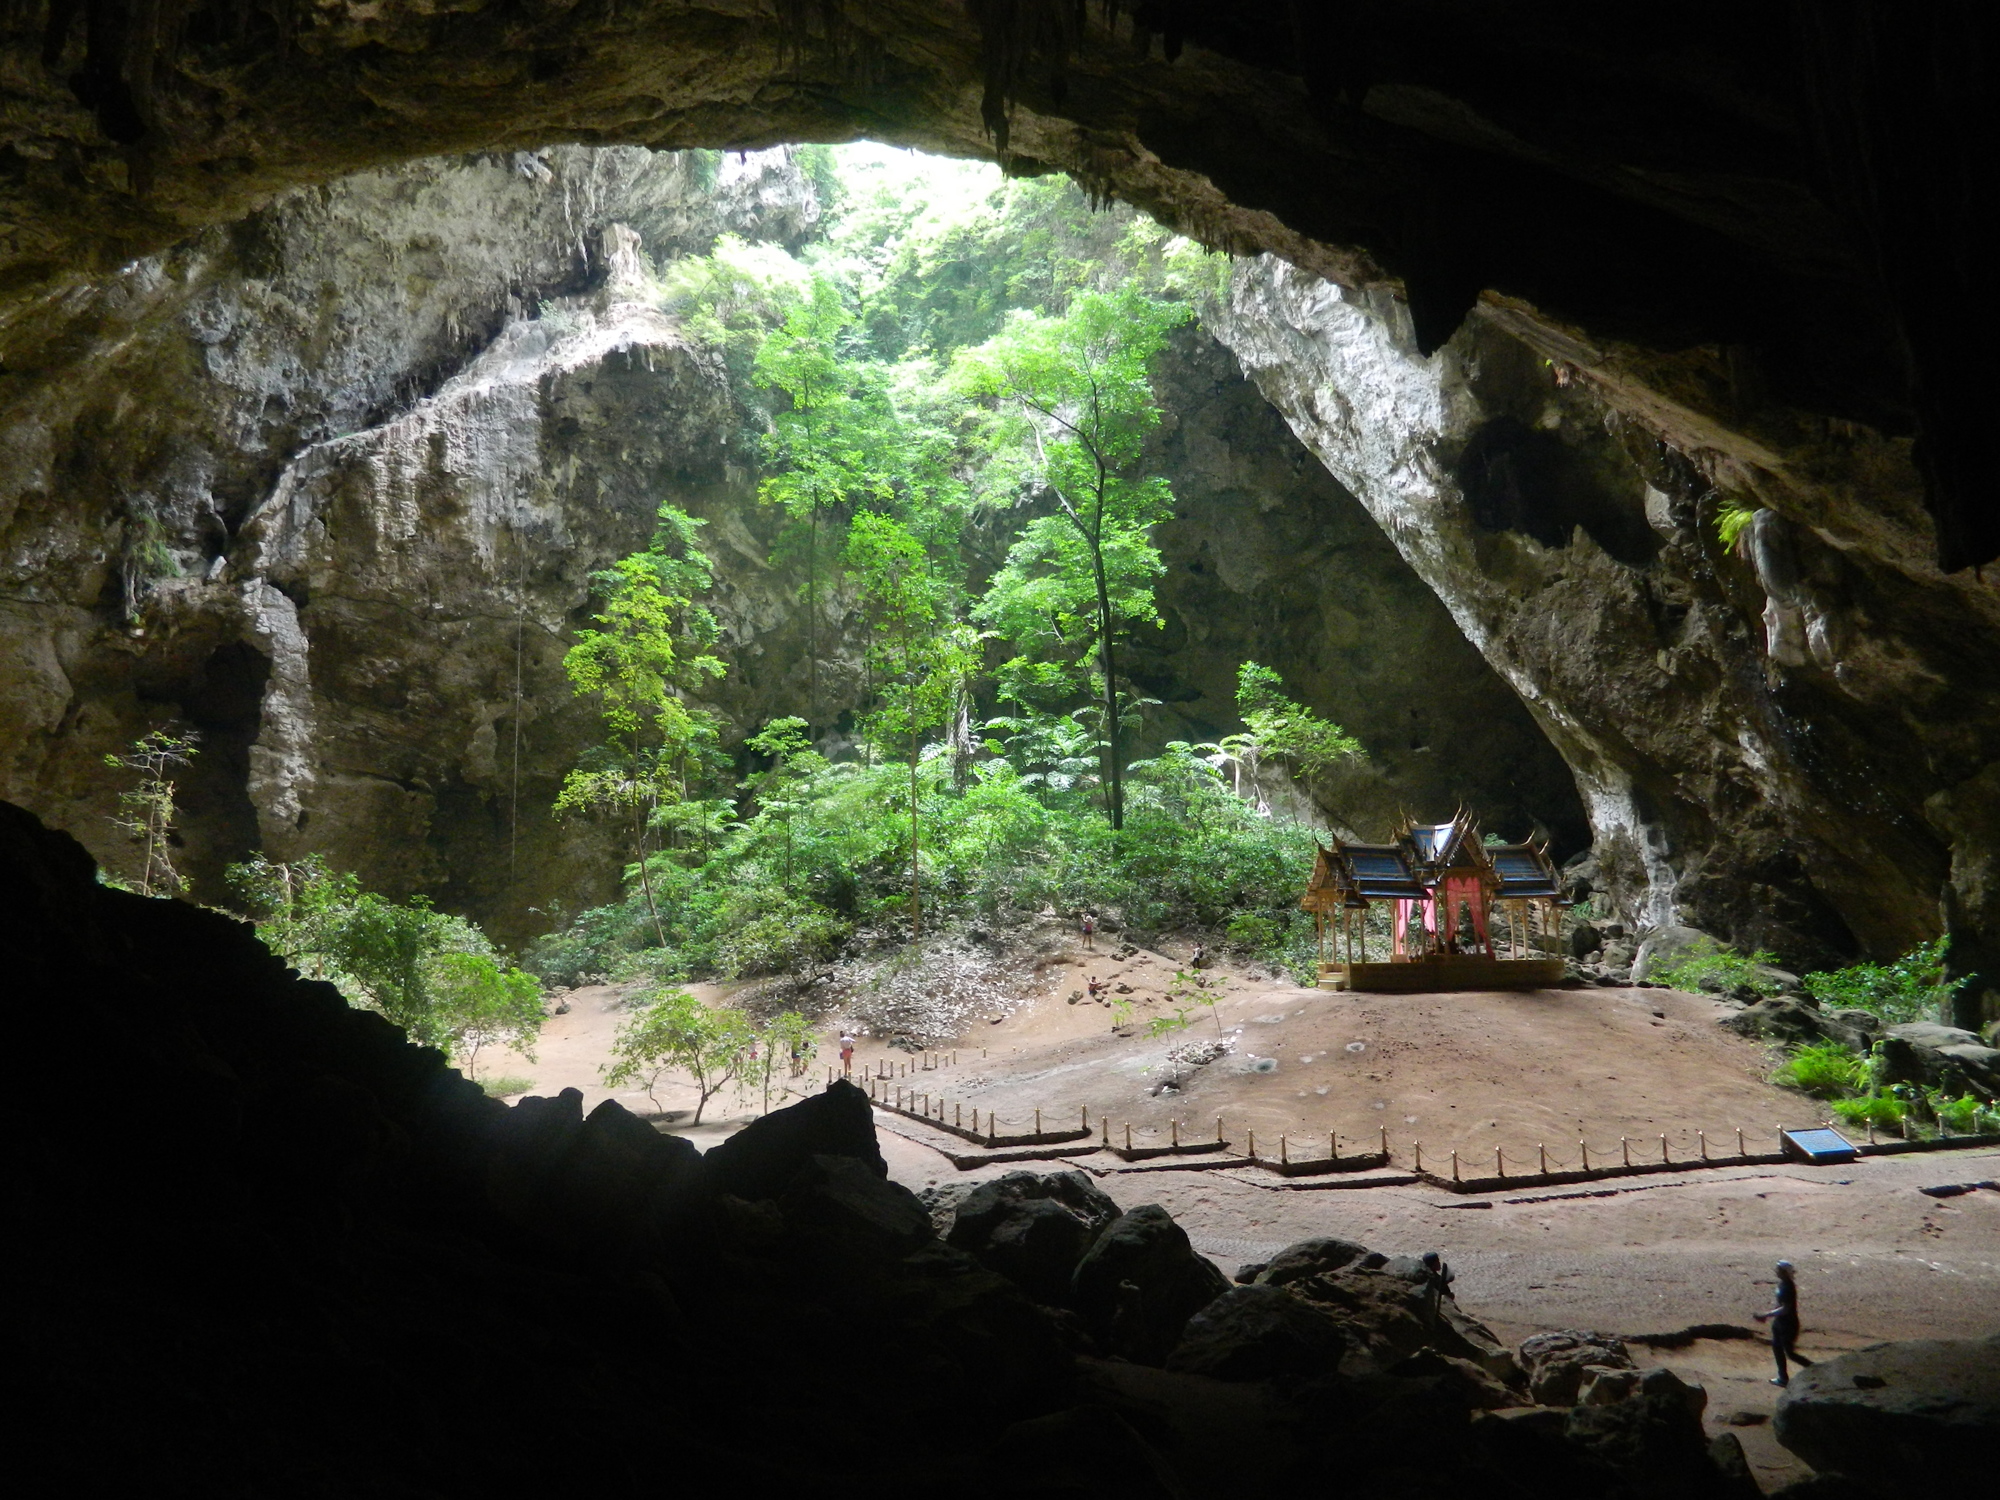 Phraya Nakhon Cave, in Sam Roi Yat National Park, is an underground forest with a temple inside.